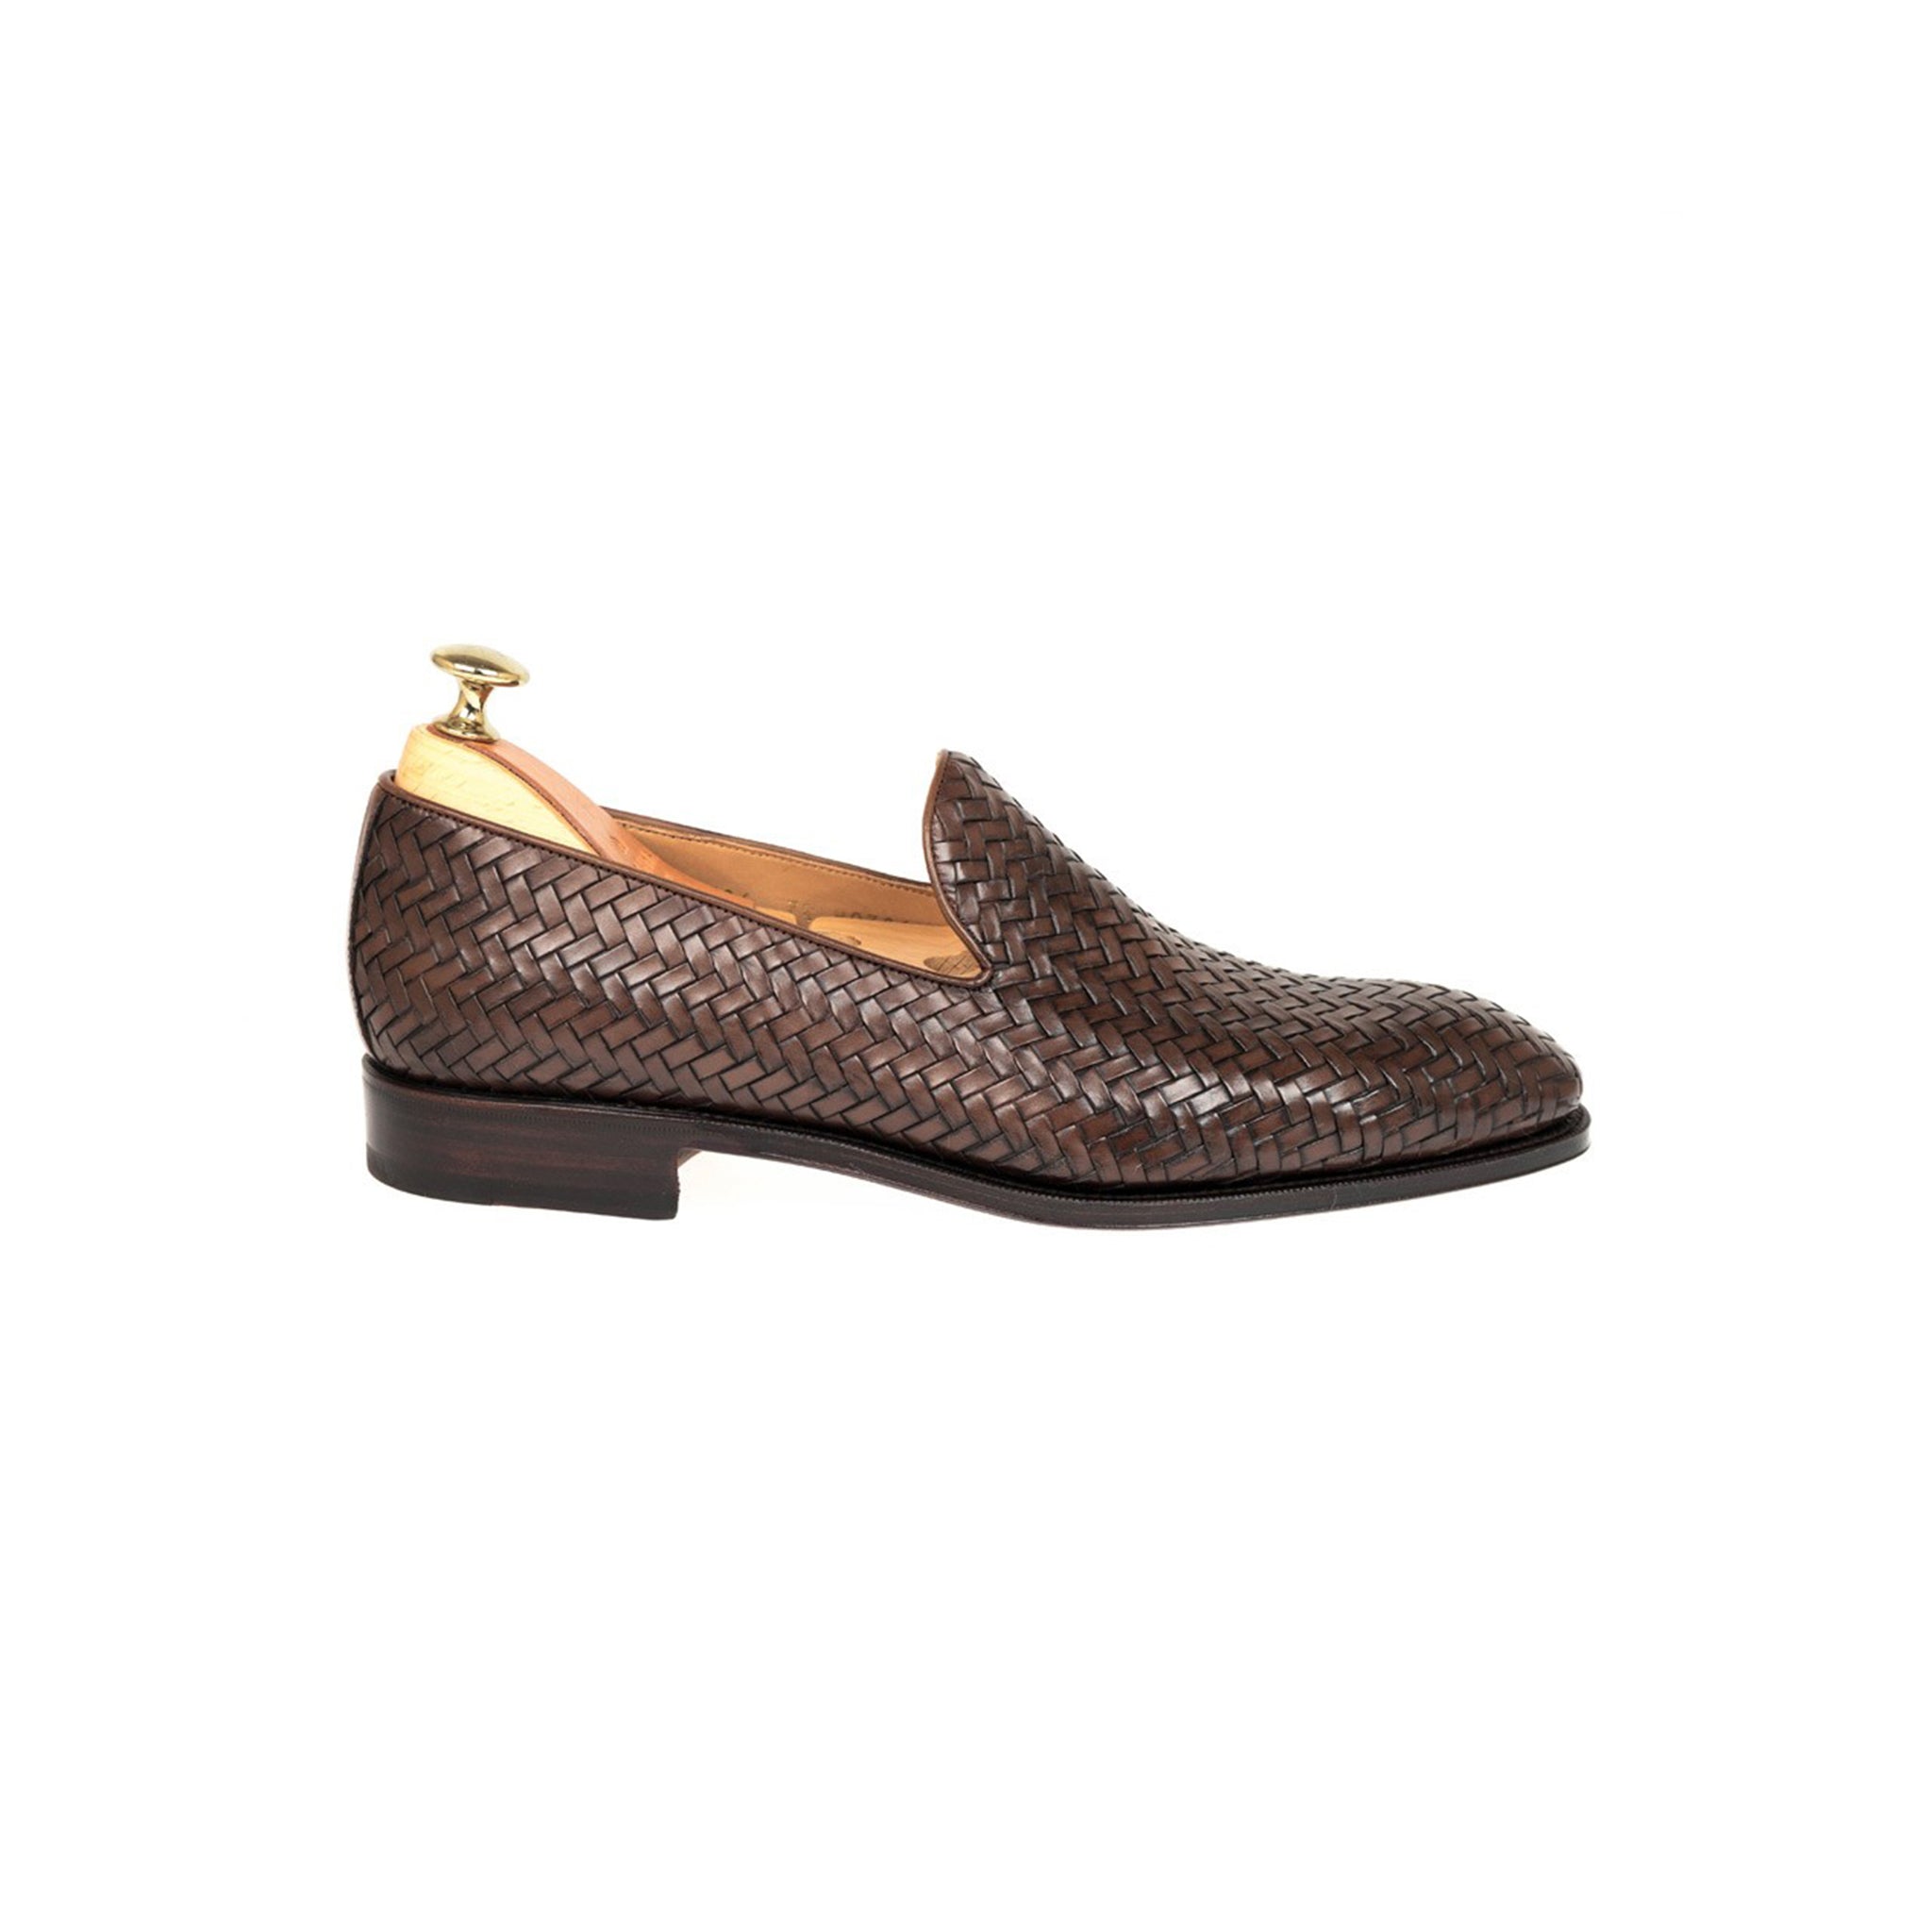 Cocoa Braided Italian Leather Loafers